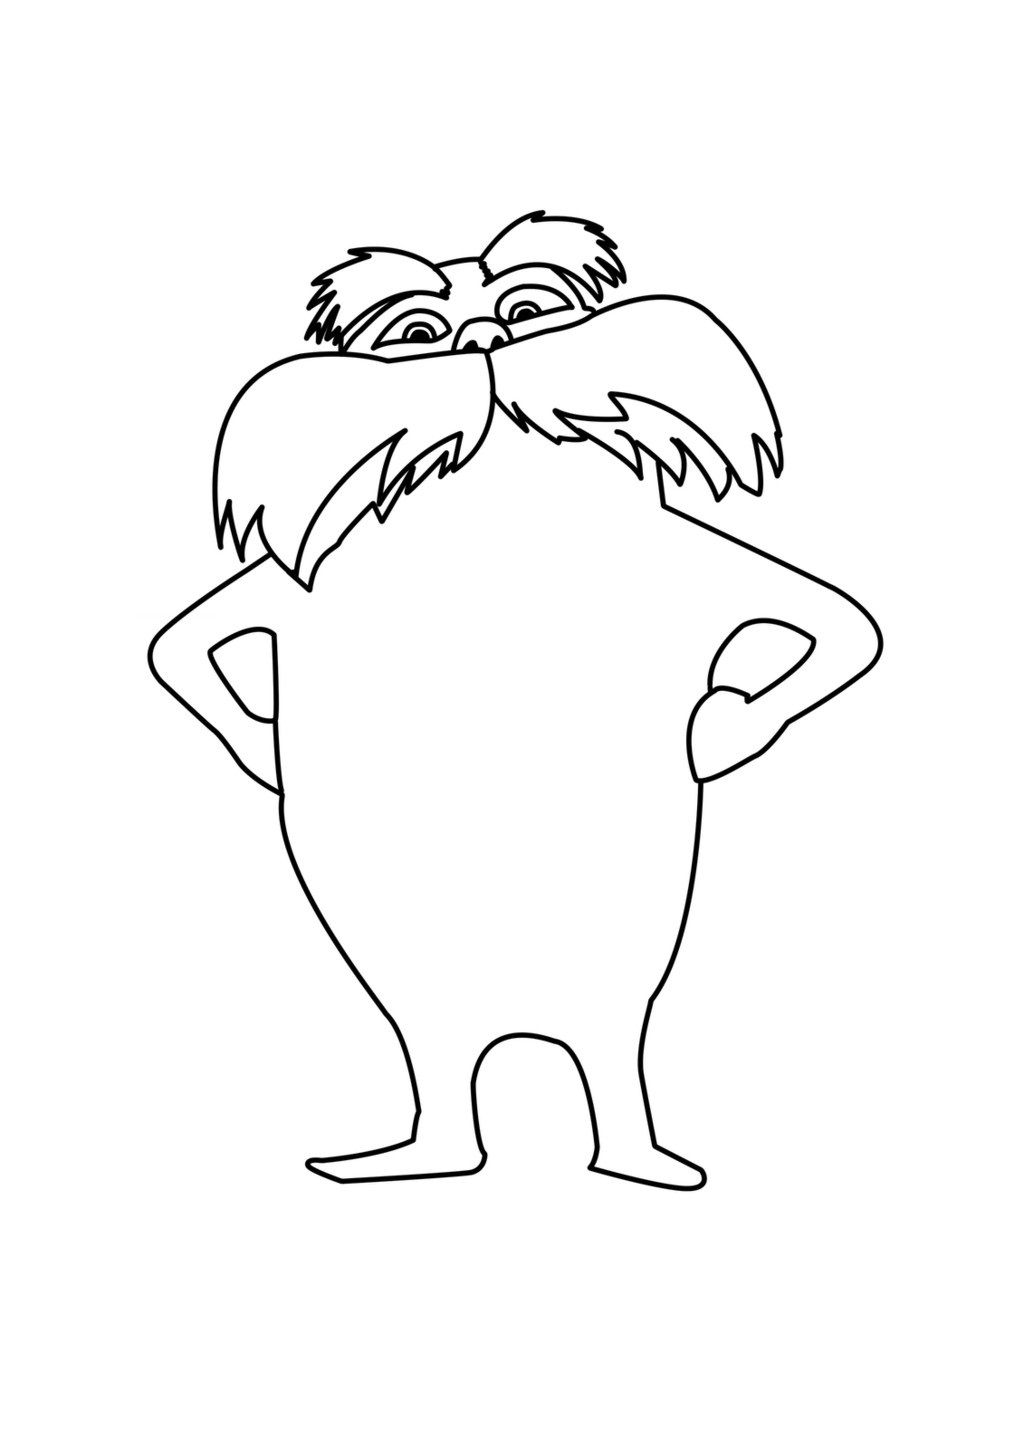 lorax coloring page lorax coloring page coloring home lorax page coloring 